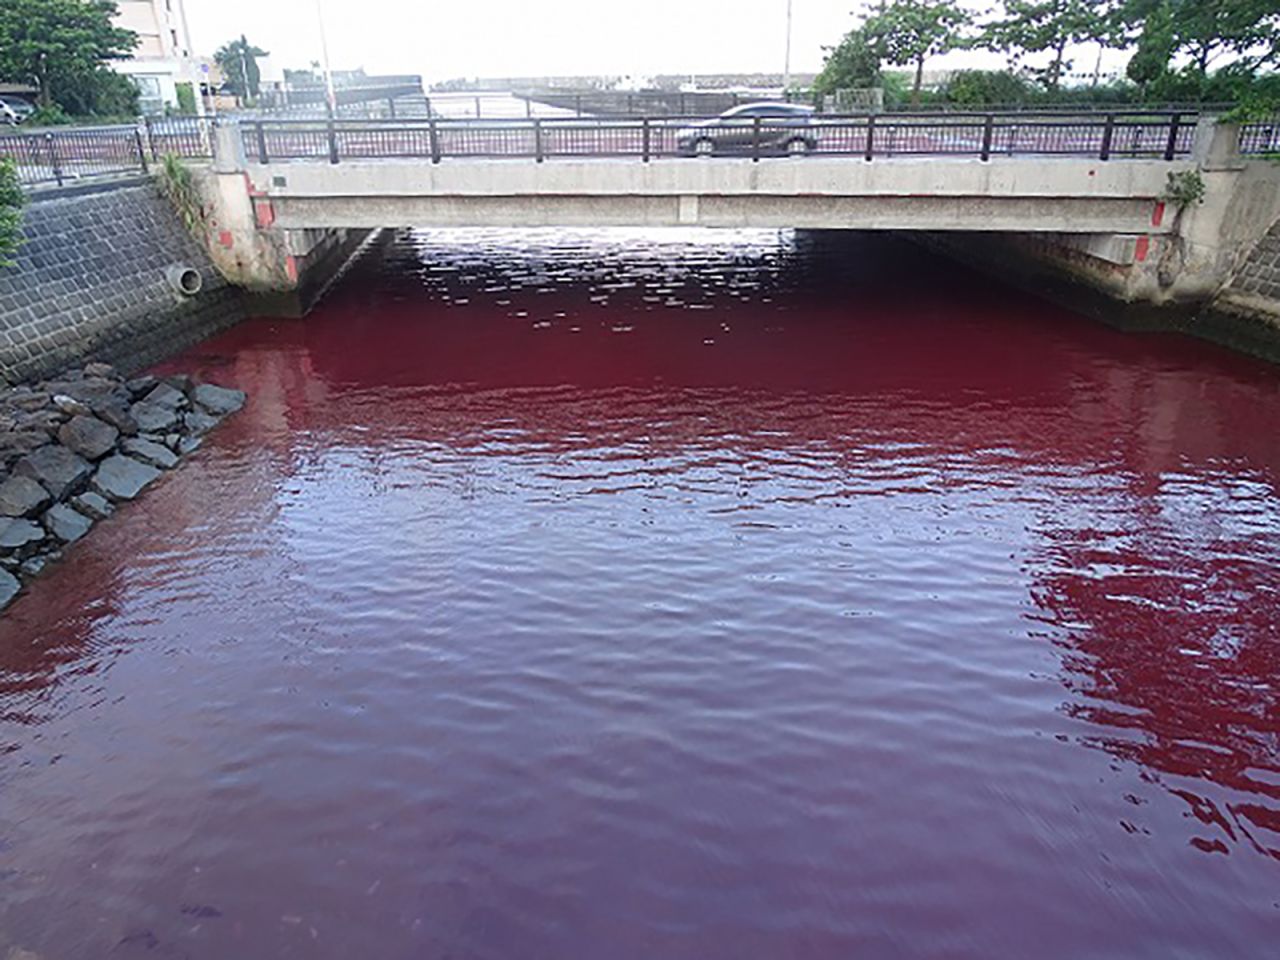 The red seawater is thought to have been caused by a coolant leak at the brewery.